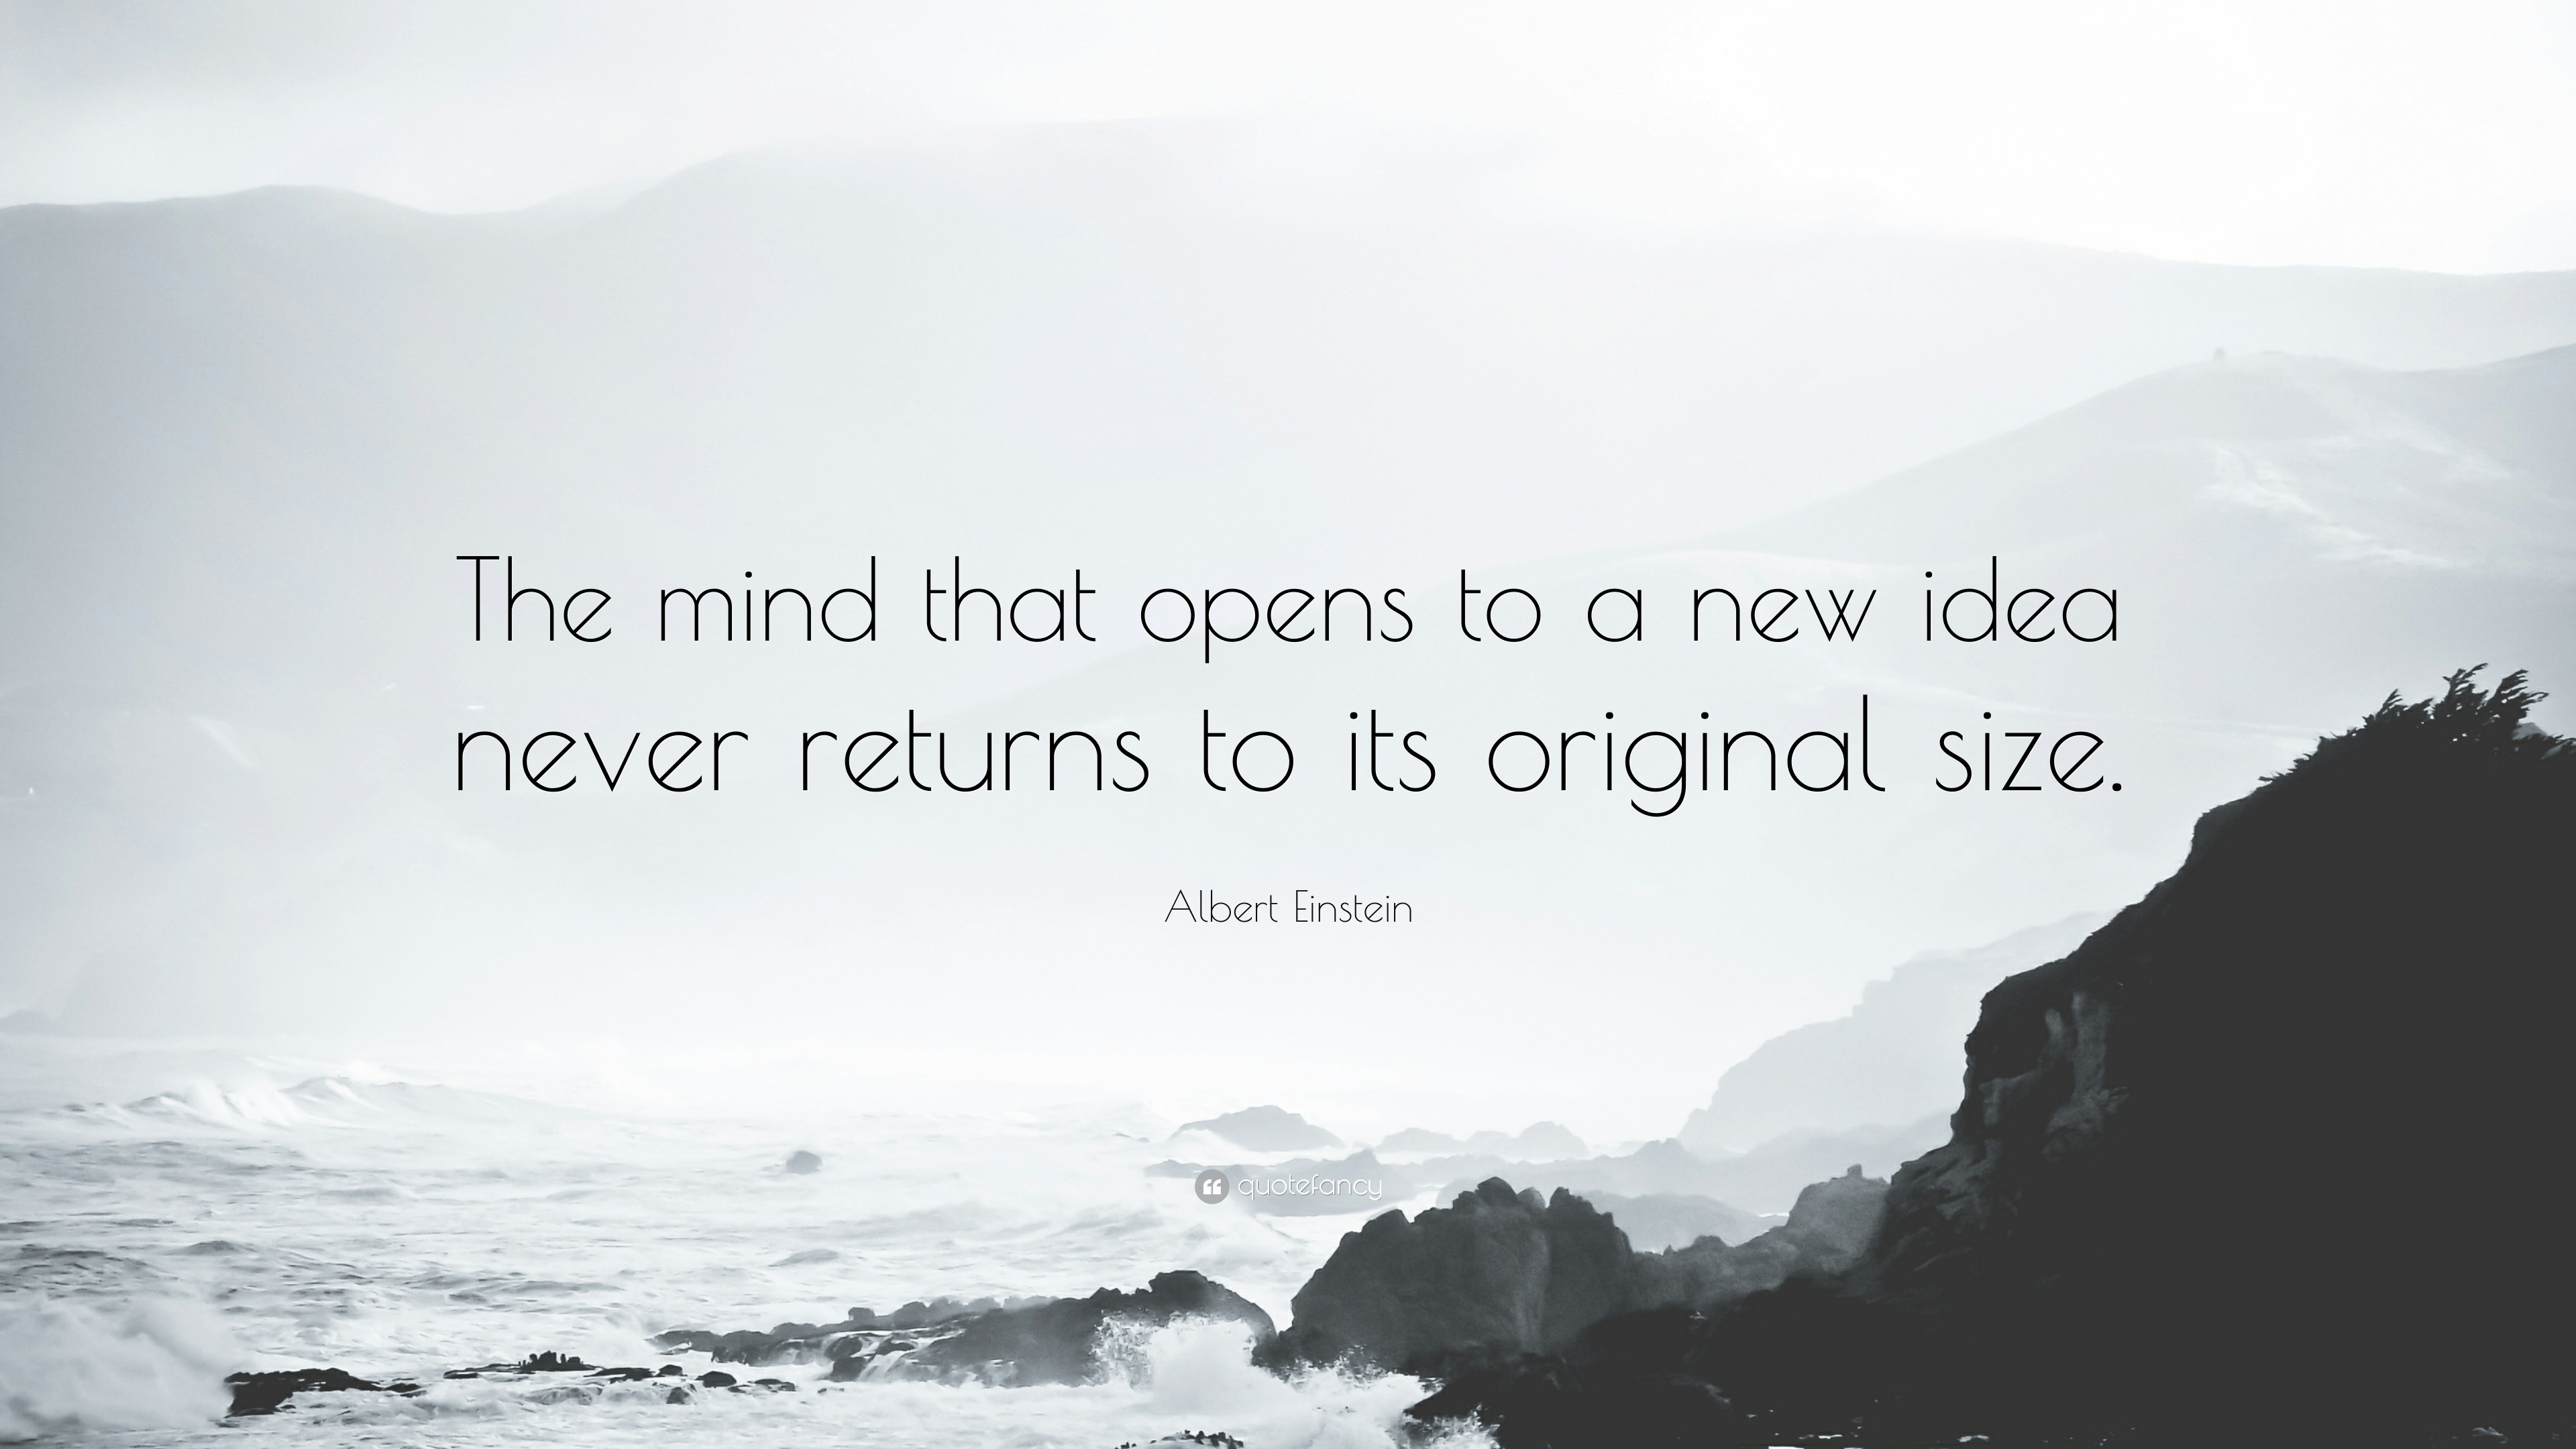 Albert Einstein Quote: “The mind that opens to a new idea never returns